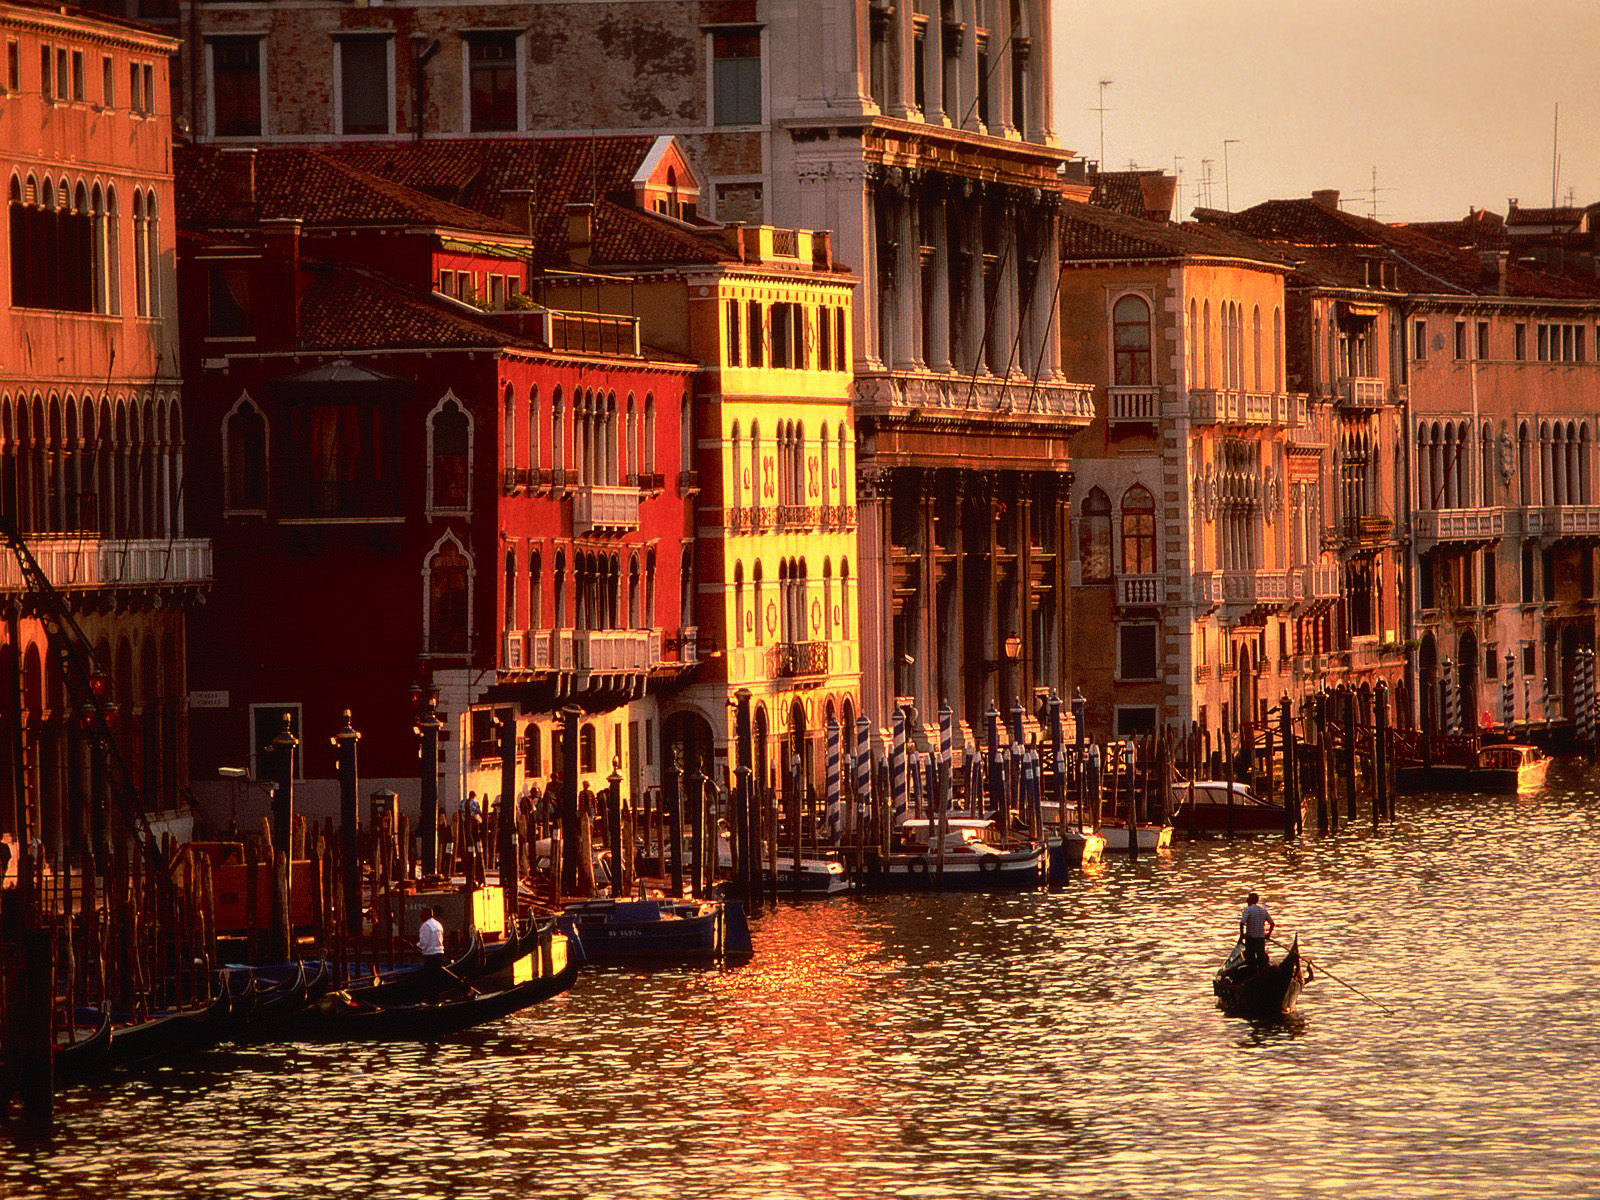 man made, building, architecture, boat, canal, gondola, italy, place, scenic, venice